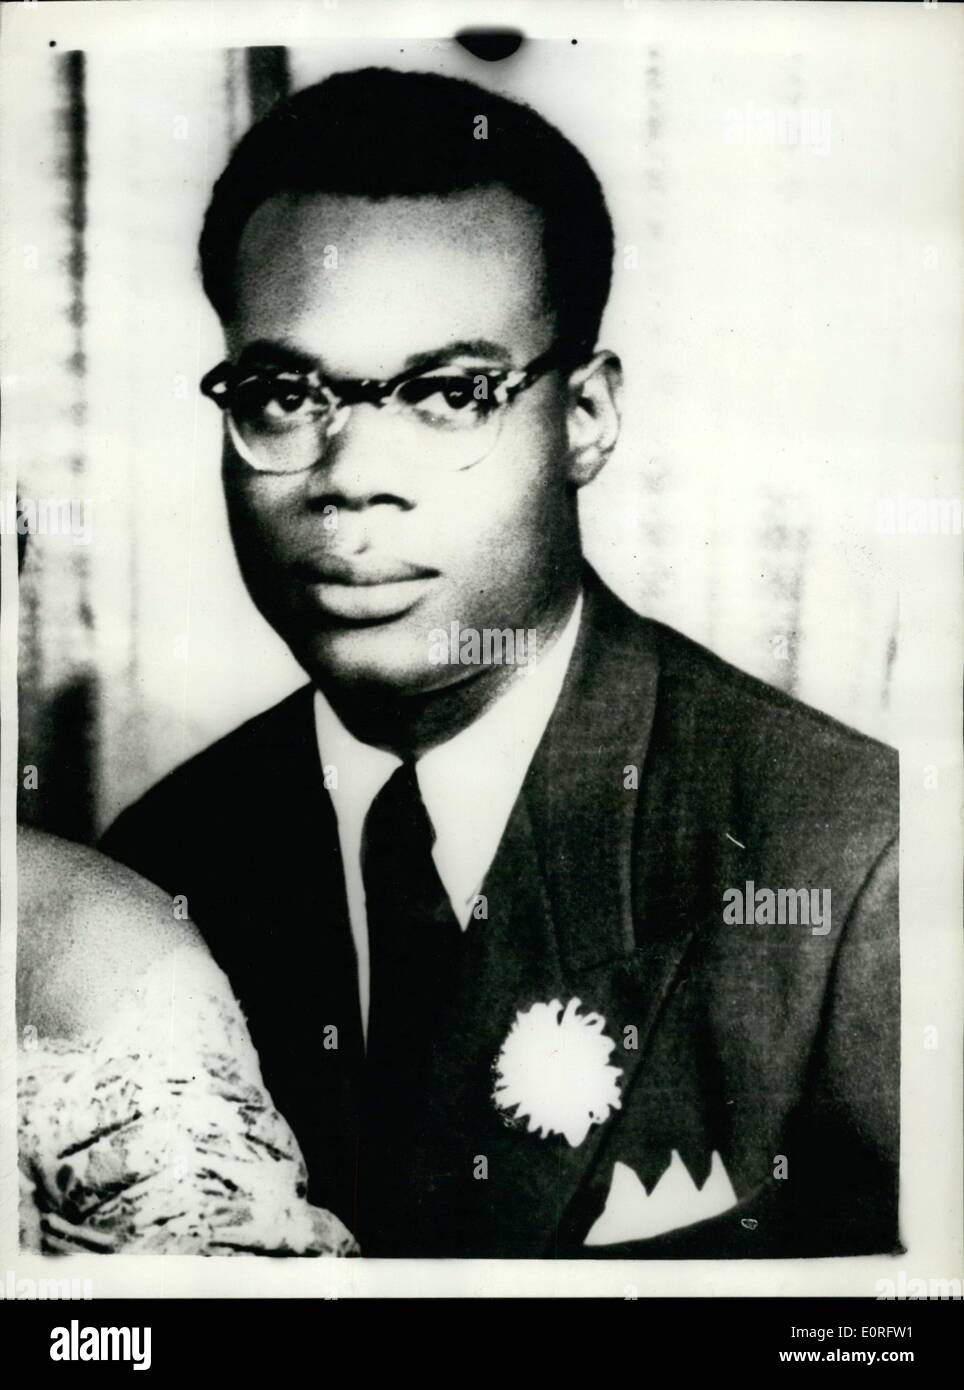 May 05, 1959 - Jamaican murdered in race riot area of London. A 32-year old West Indian, Kelso Benjamin Cochrane, a carpenter, was walking home to Bevington-road North Kensington, after attending hospital with a broken thumb early yesterday, when a group of youths challenged him on a street corner: ''Where are you going Jim Crow''. A running fight developed and Cochrane was stabbed in the chest. Two colored men took him to hospital by taxi, but he died a few minutes after admission. The murder occurred in the Notting Hill area - scene of last year's racial disturbances Stock Photo